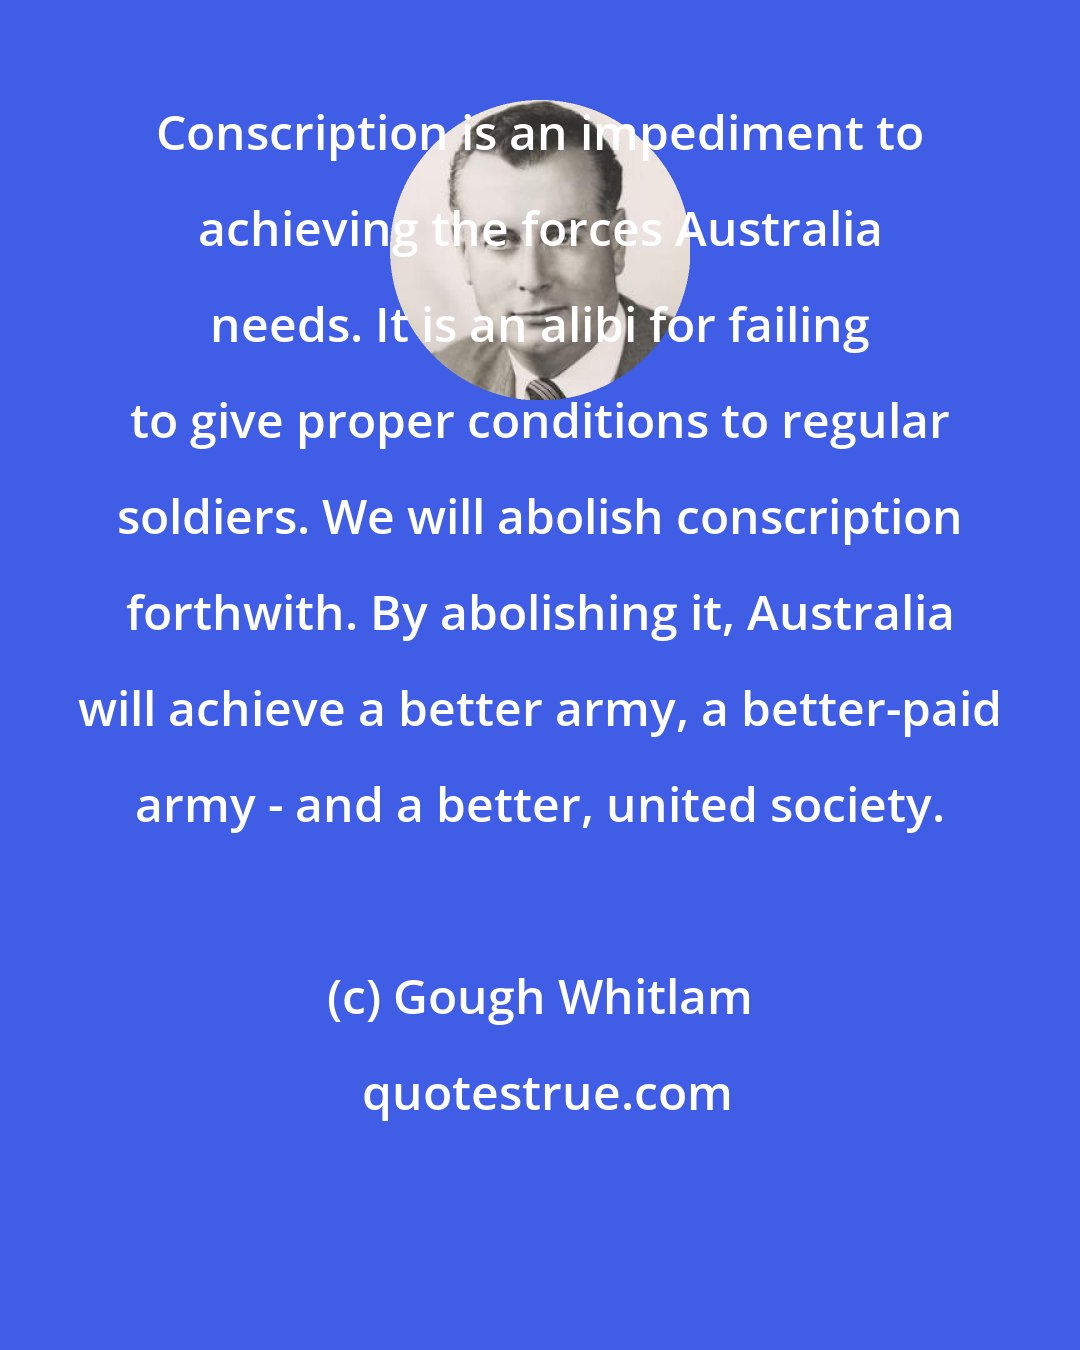 Gough Whitlam: Conscription is an impediment to achieving the forces Australia needs. It is an alibi for failing to give proper conditions to regular soldiers. We will abolish conscription forthwith. By abolishing it, Australia will achieve a better army, a better-paid army - and a better, united society.